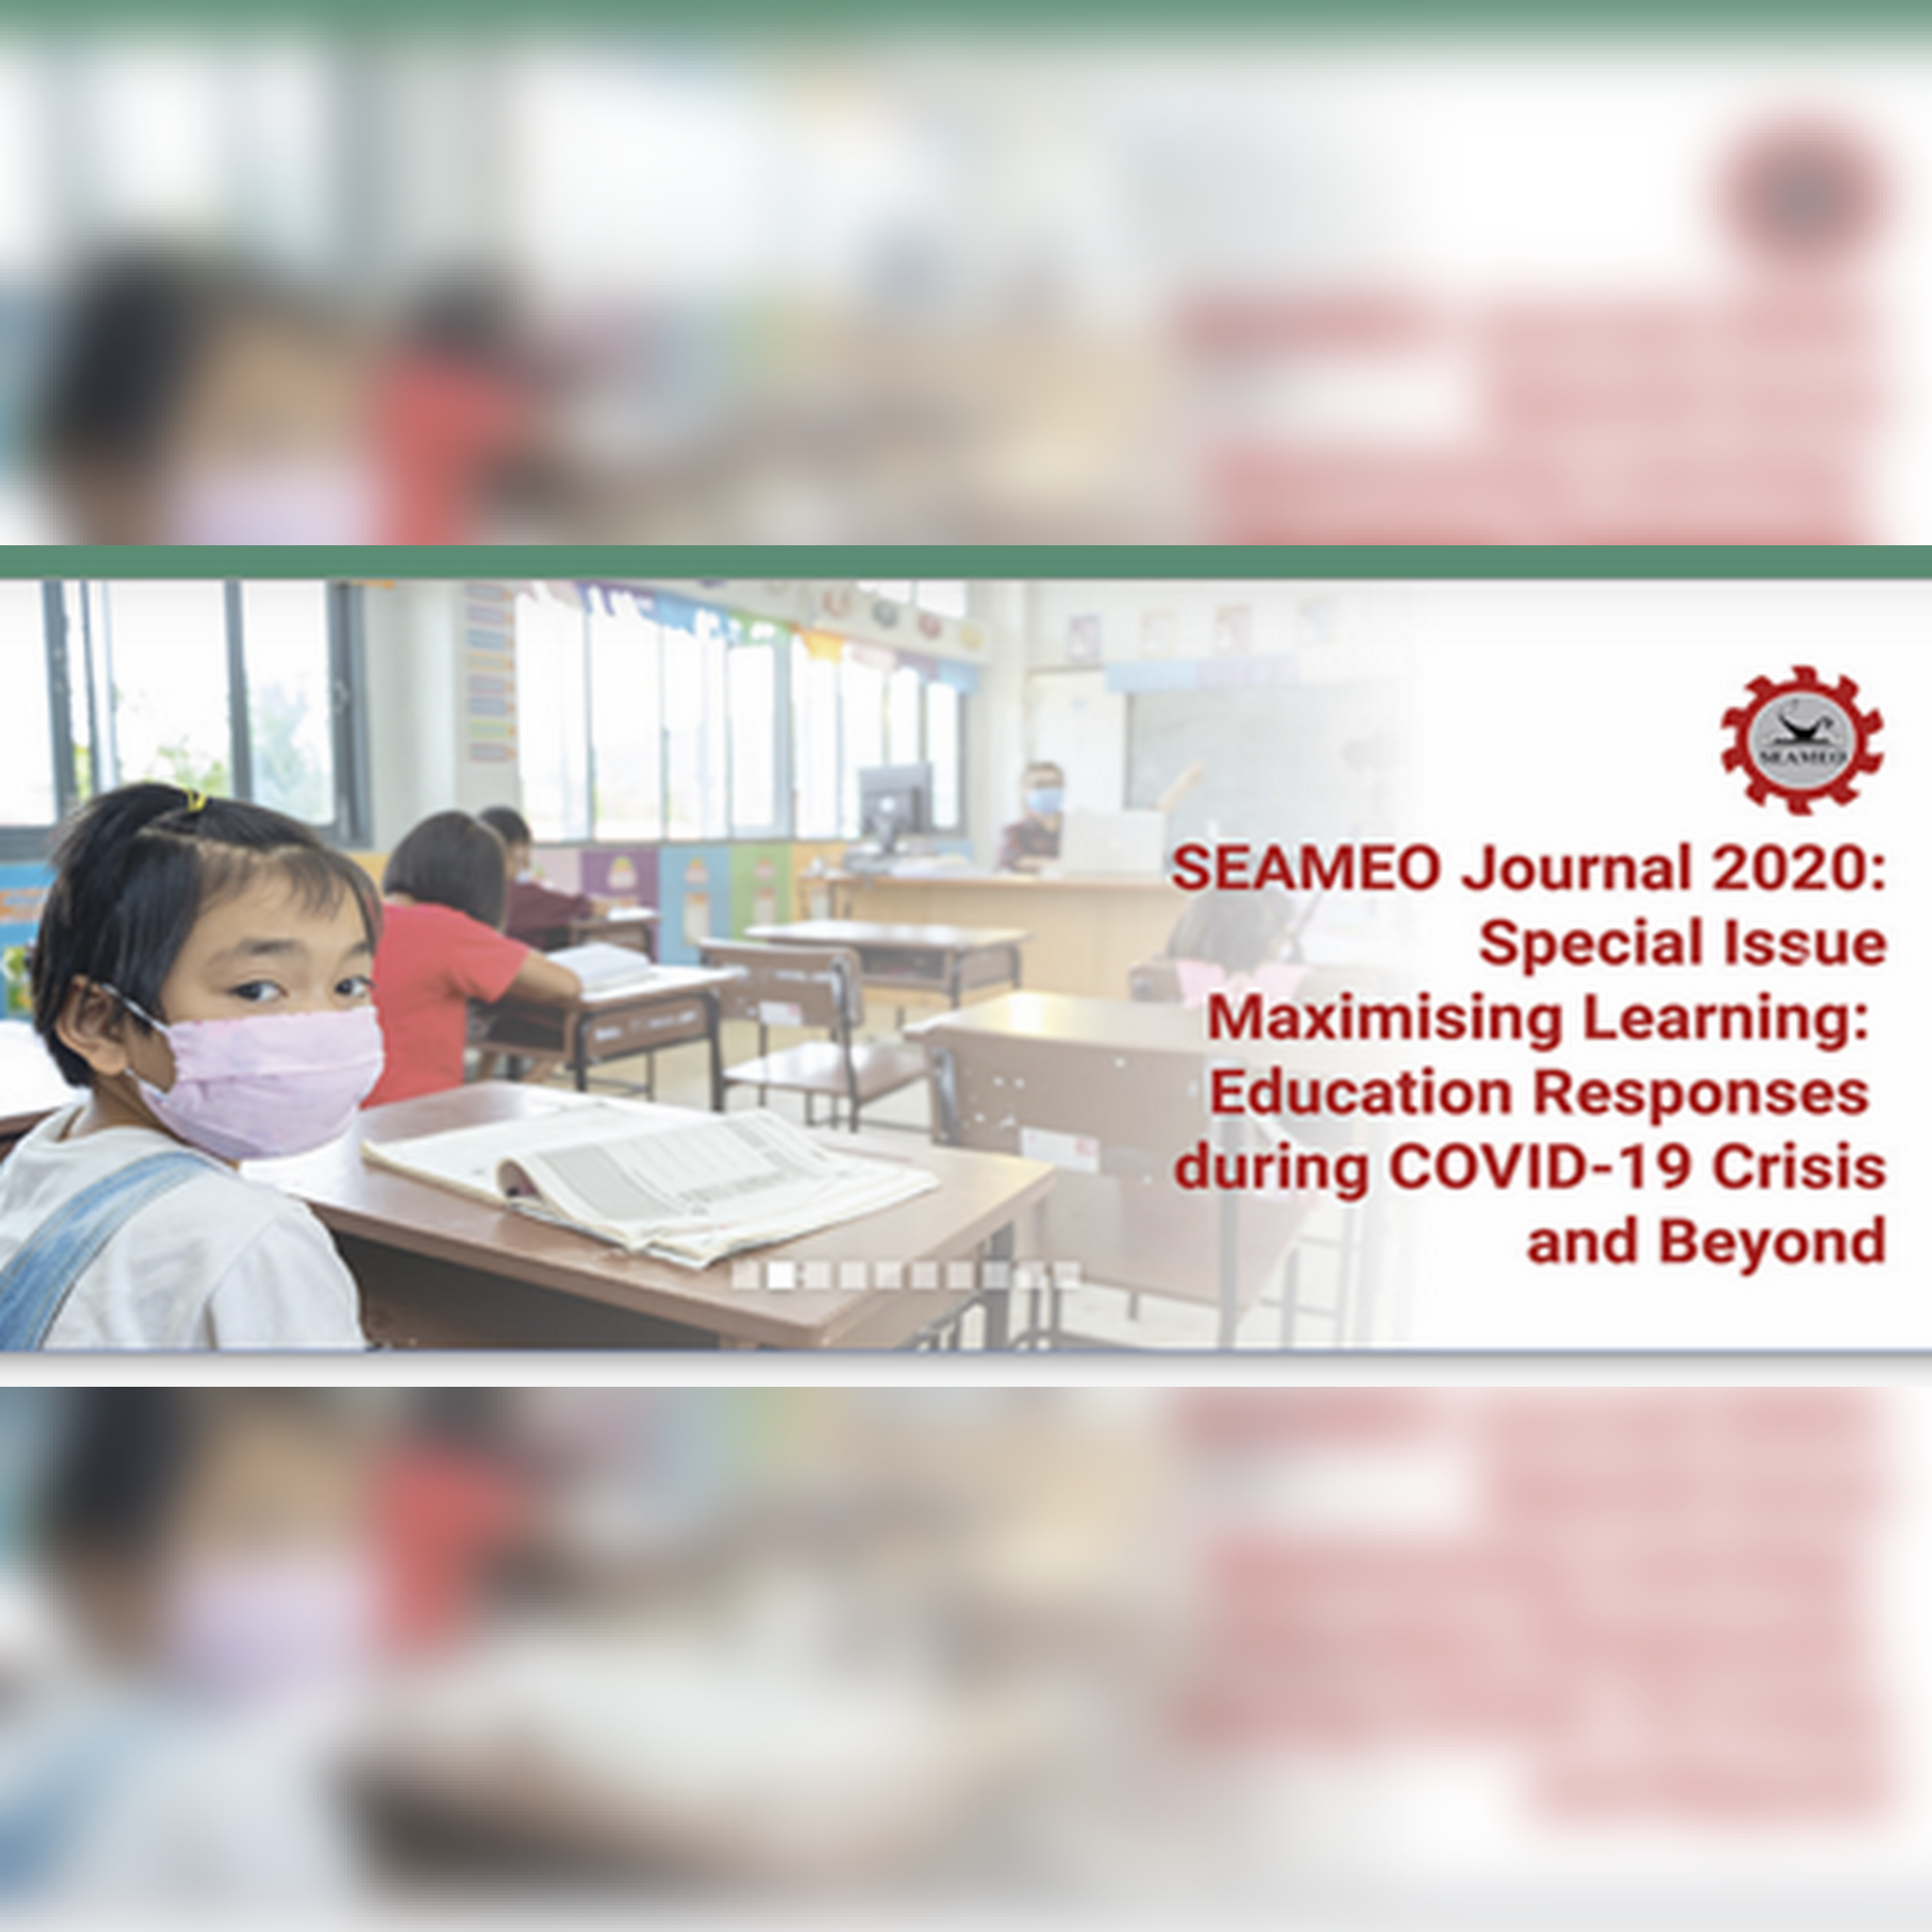 SEAMEO Journal 2020 Special Issue on “Maximising Learning: Education Responses during COVID-19 Crisis and Beyond”